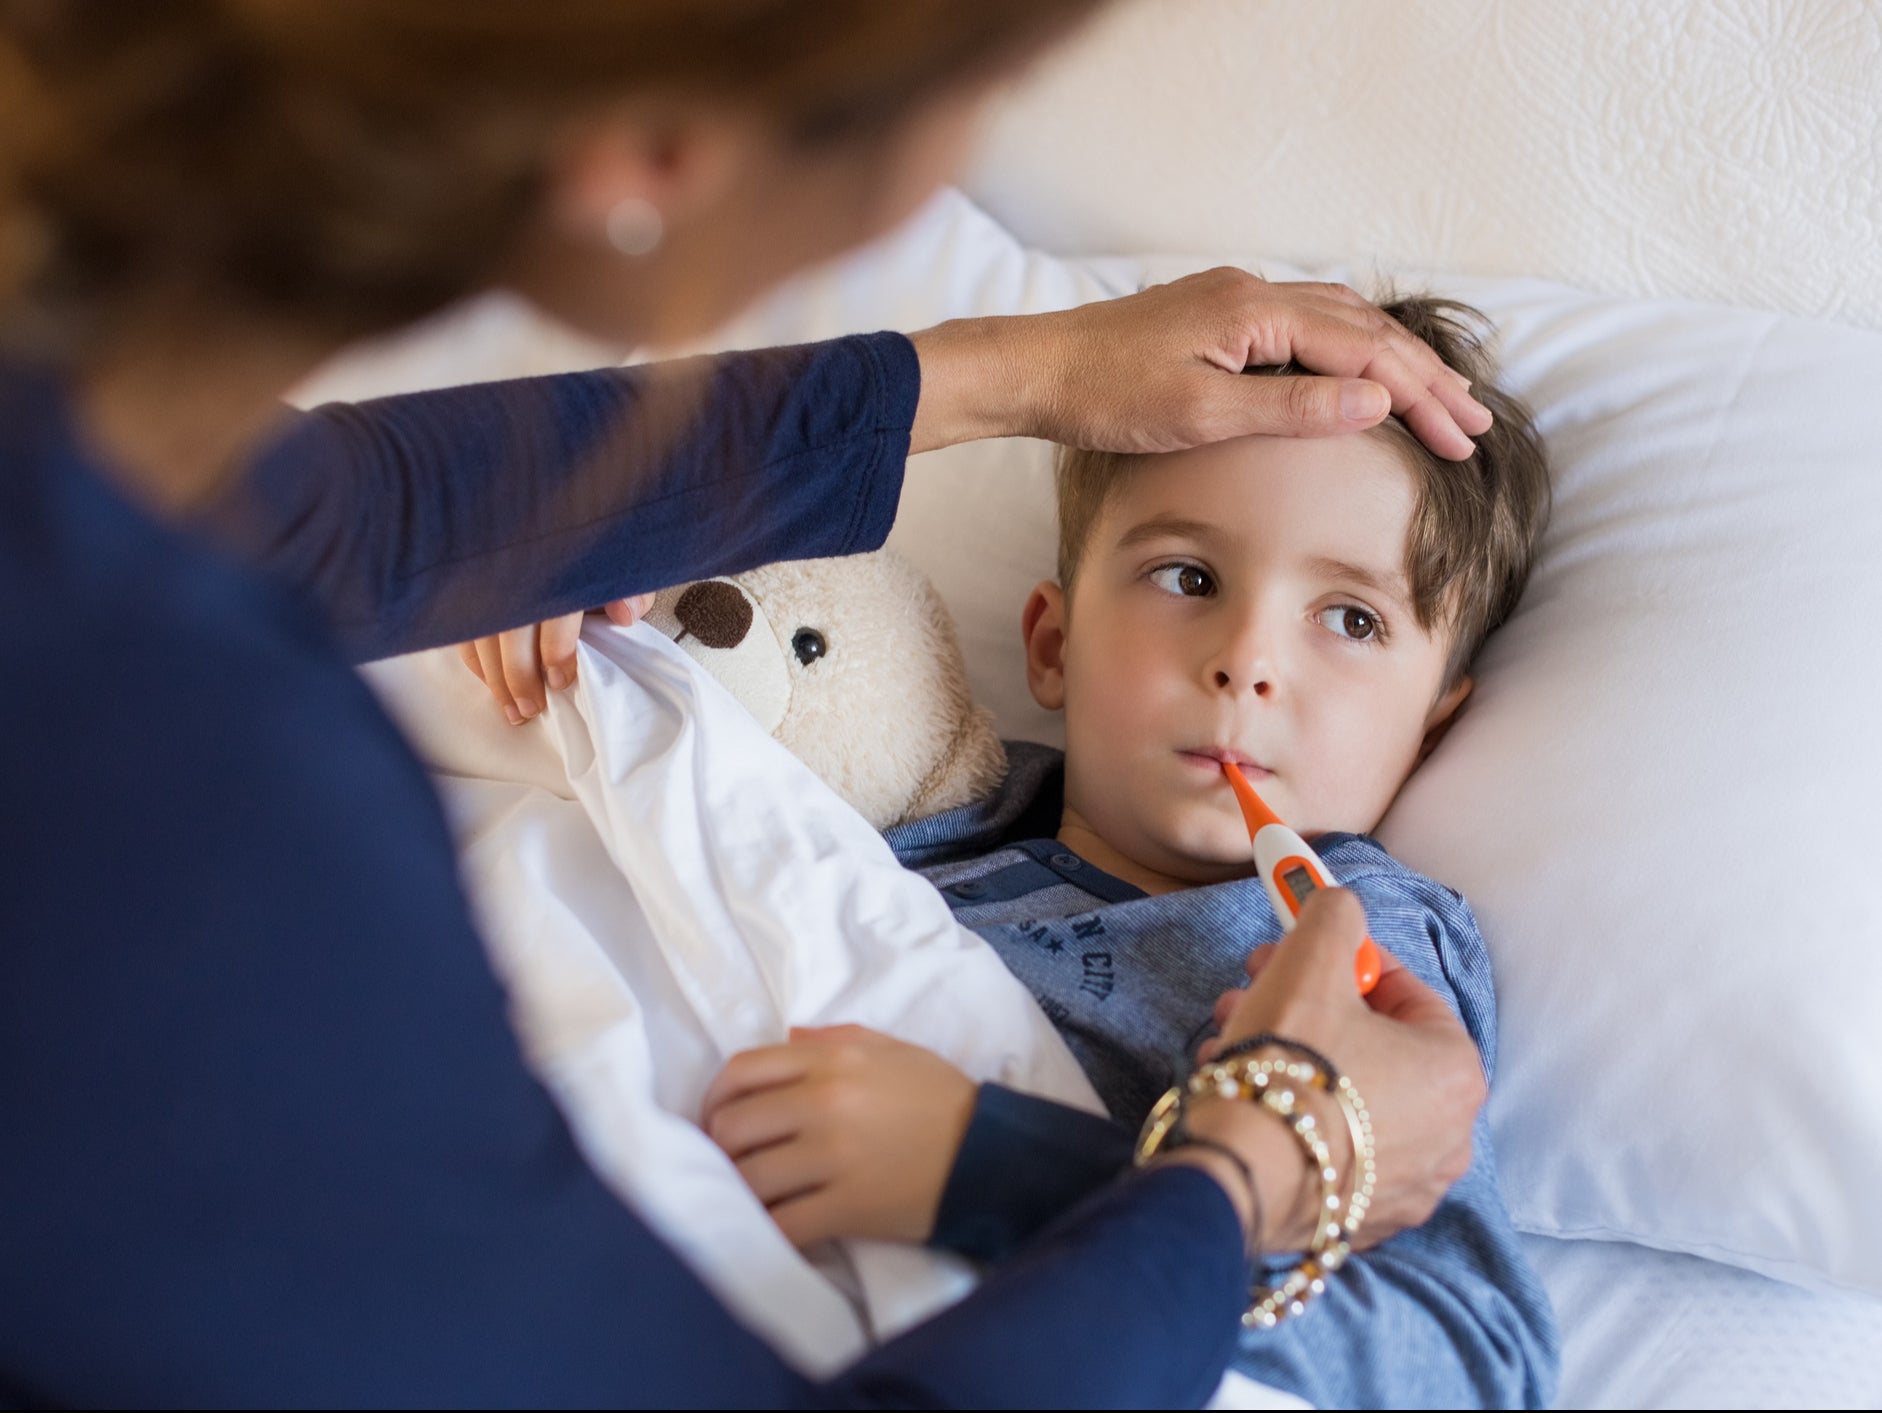 A high temperature can be among the first symptoms of scarlet fever